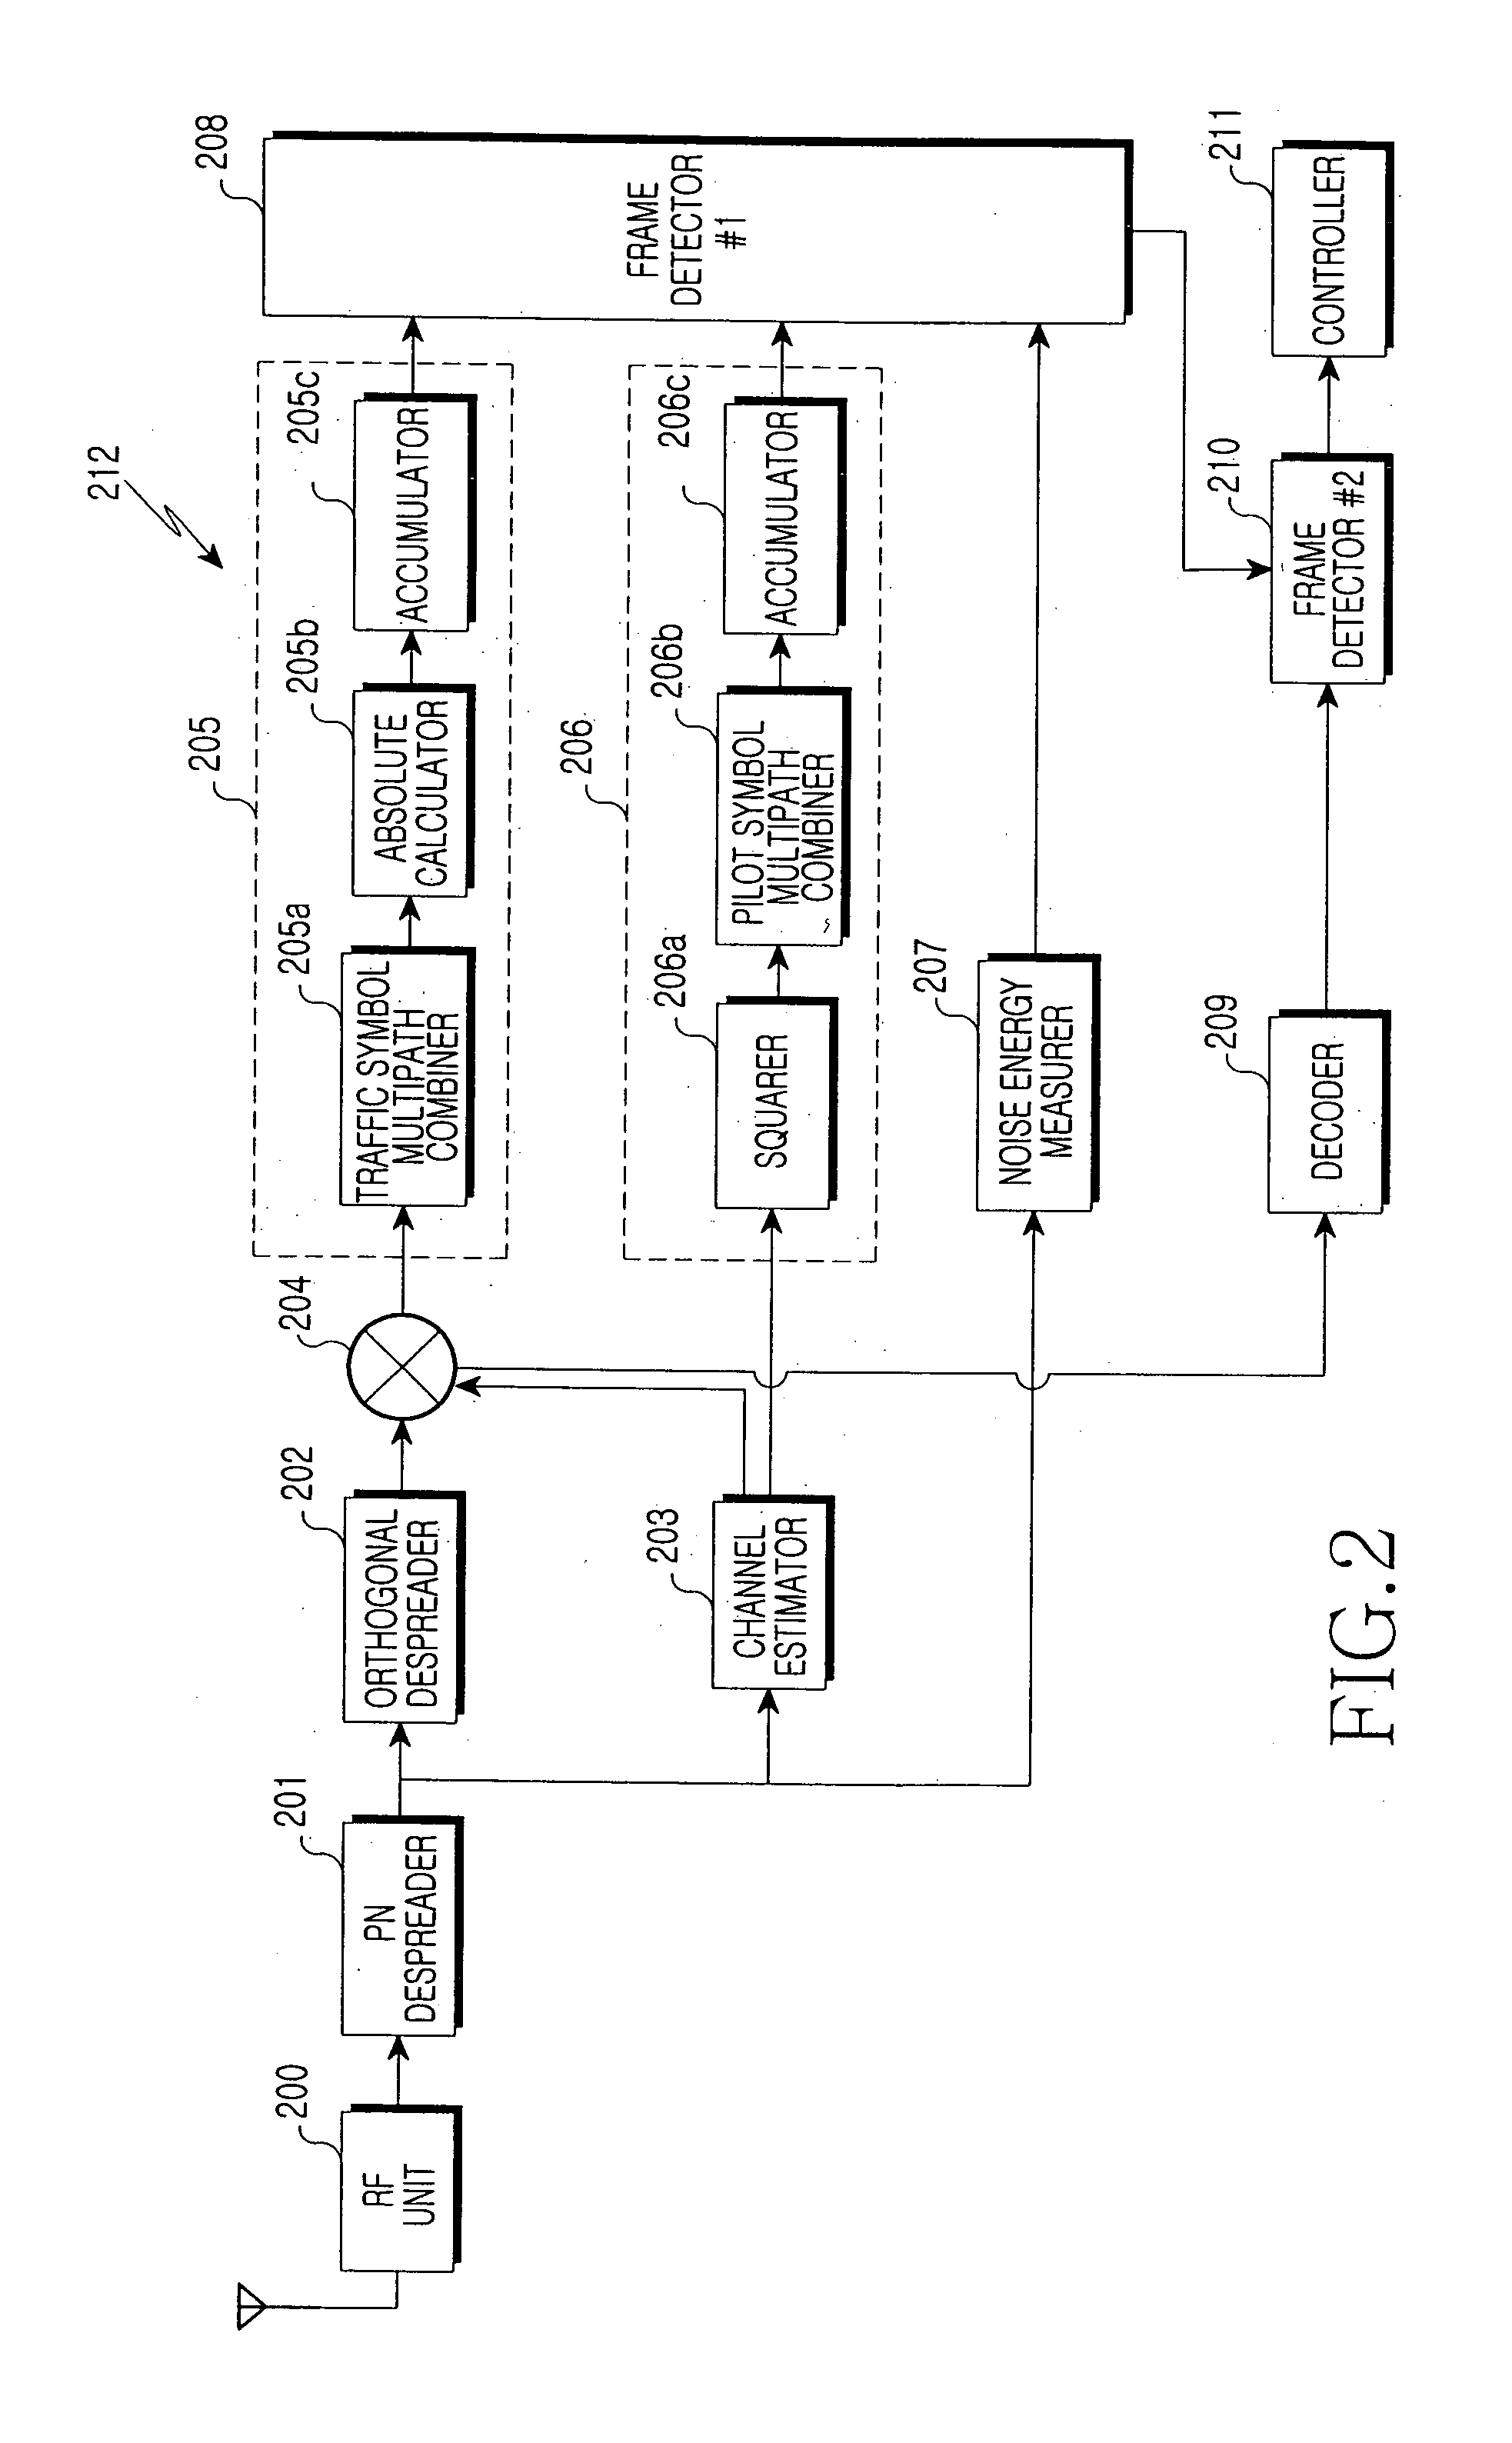 Apparatus and method for detecting discontinuous transmission period in a CDMA mobile communication system